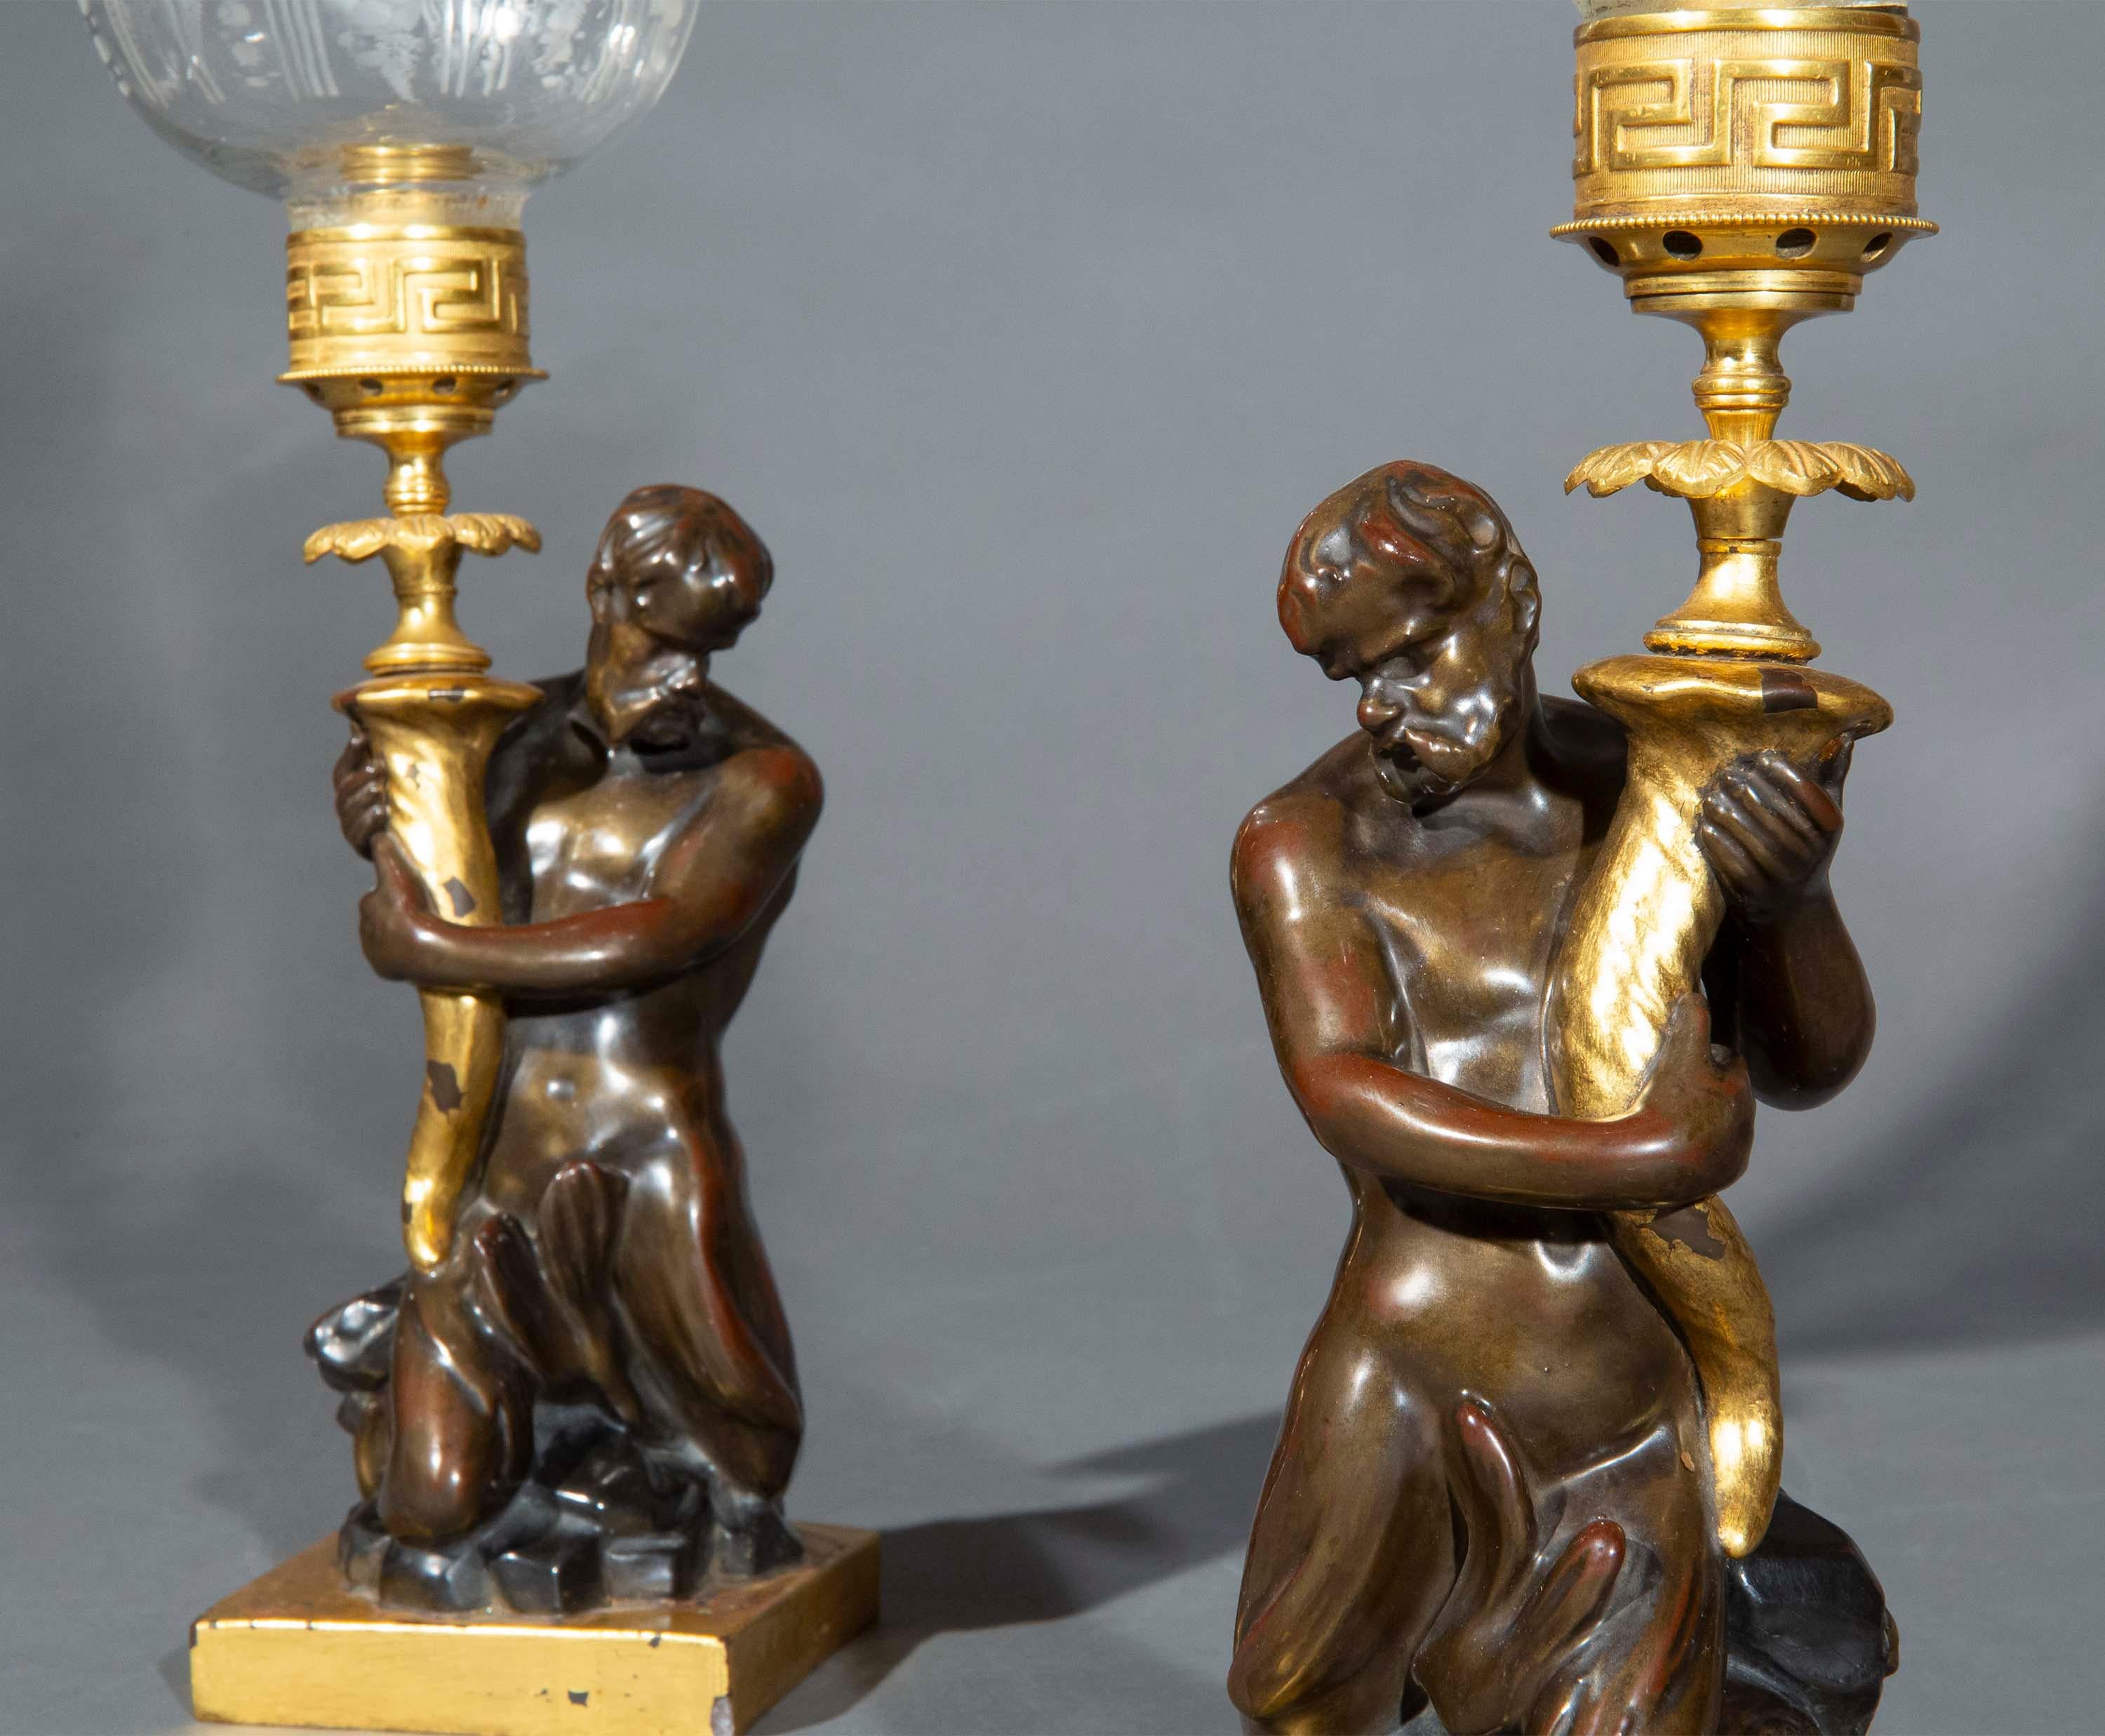 Rare and fabulous pair of Early 19th Century Triton Candlesticks by Wood & Caldwell. English lustre pottery, circa 1815. Now mounted as storm lanterns (also called hurricane lanterns or hurricane lamps). 

Why we like them:

The origin of Tritons